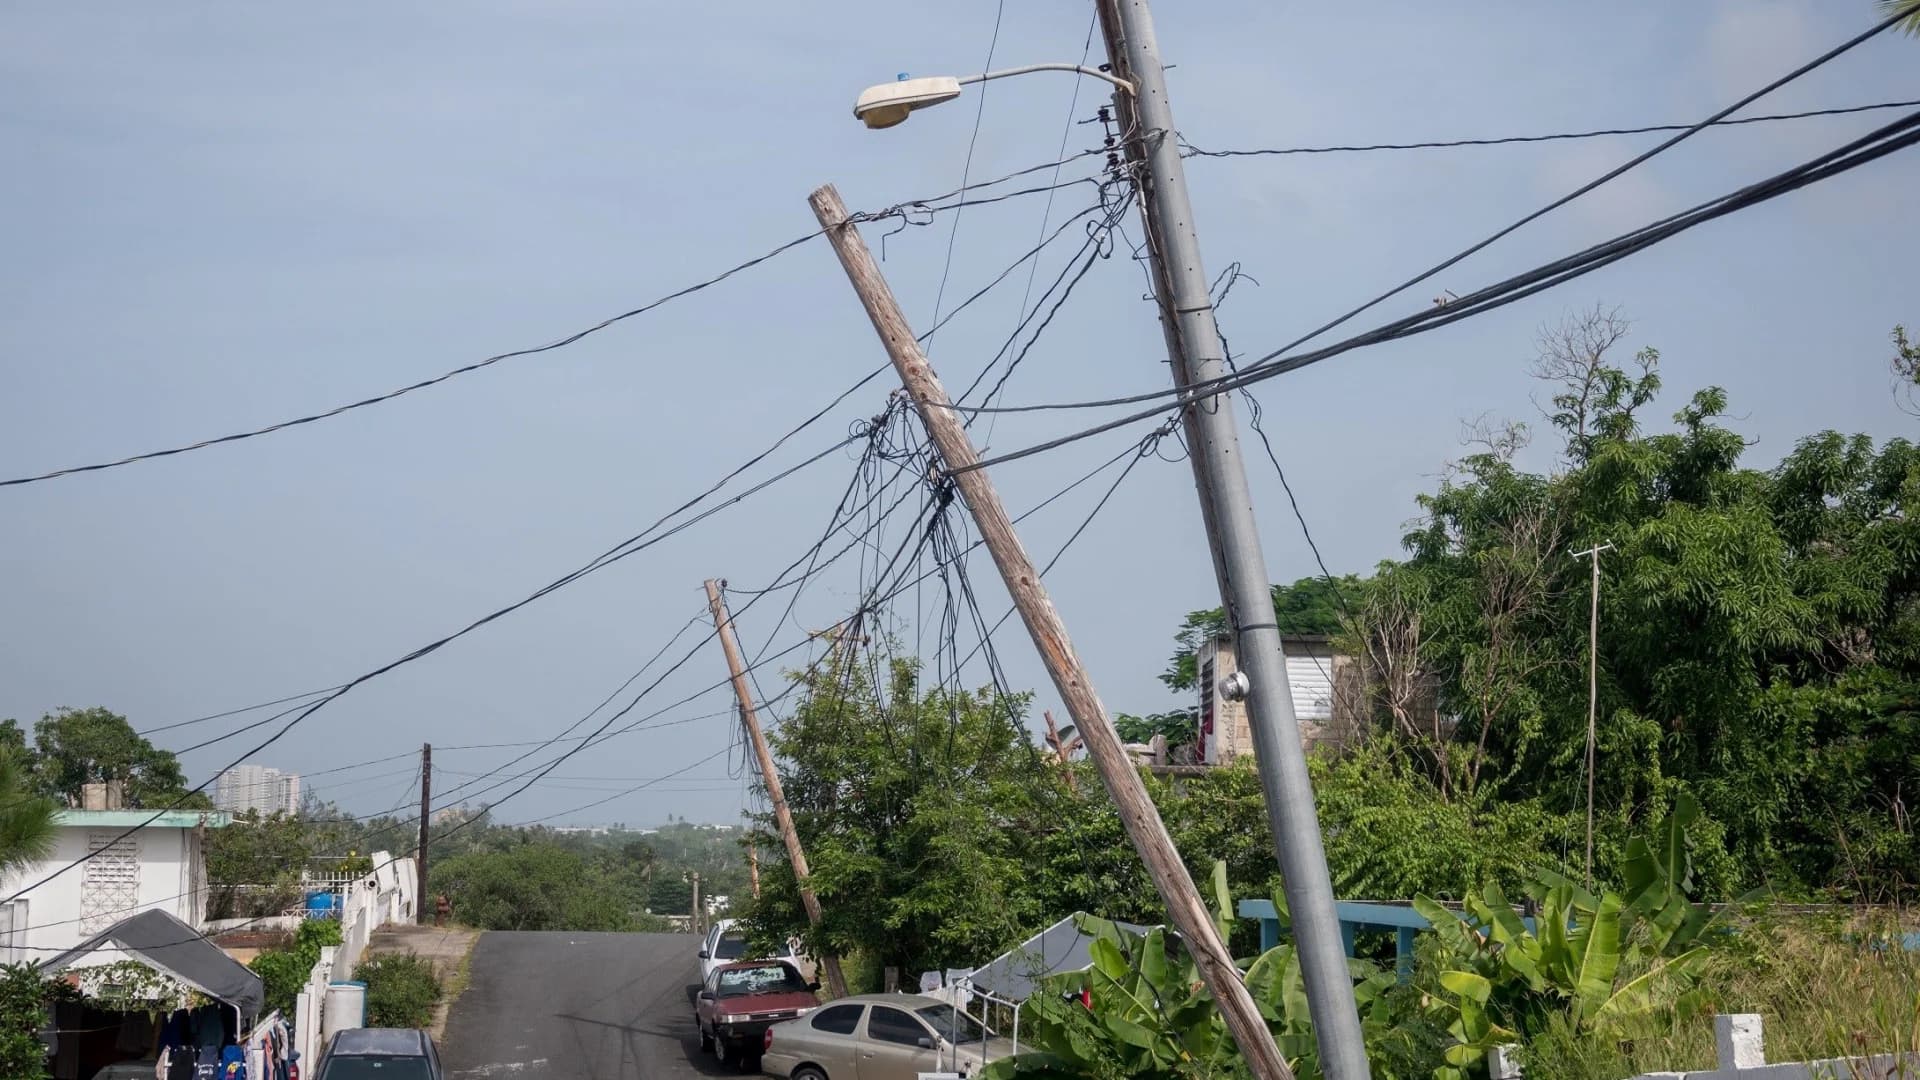 One year after Maria, Puerto Rico's recovery continues